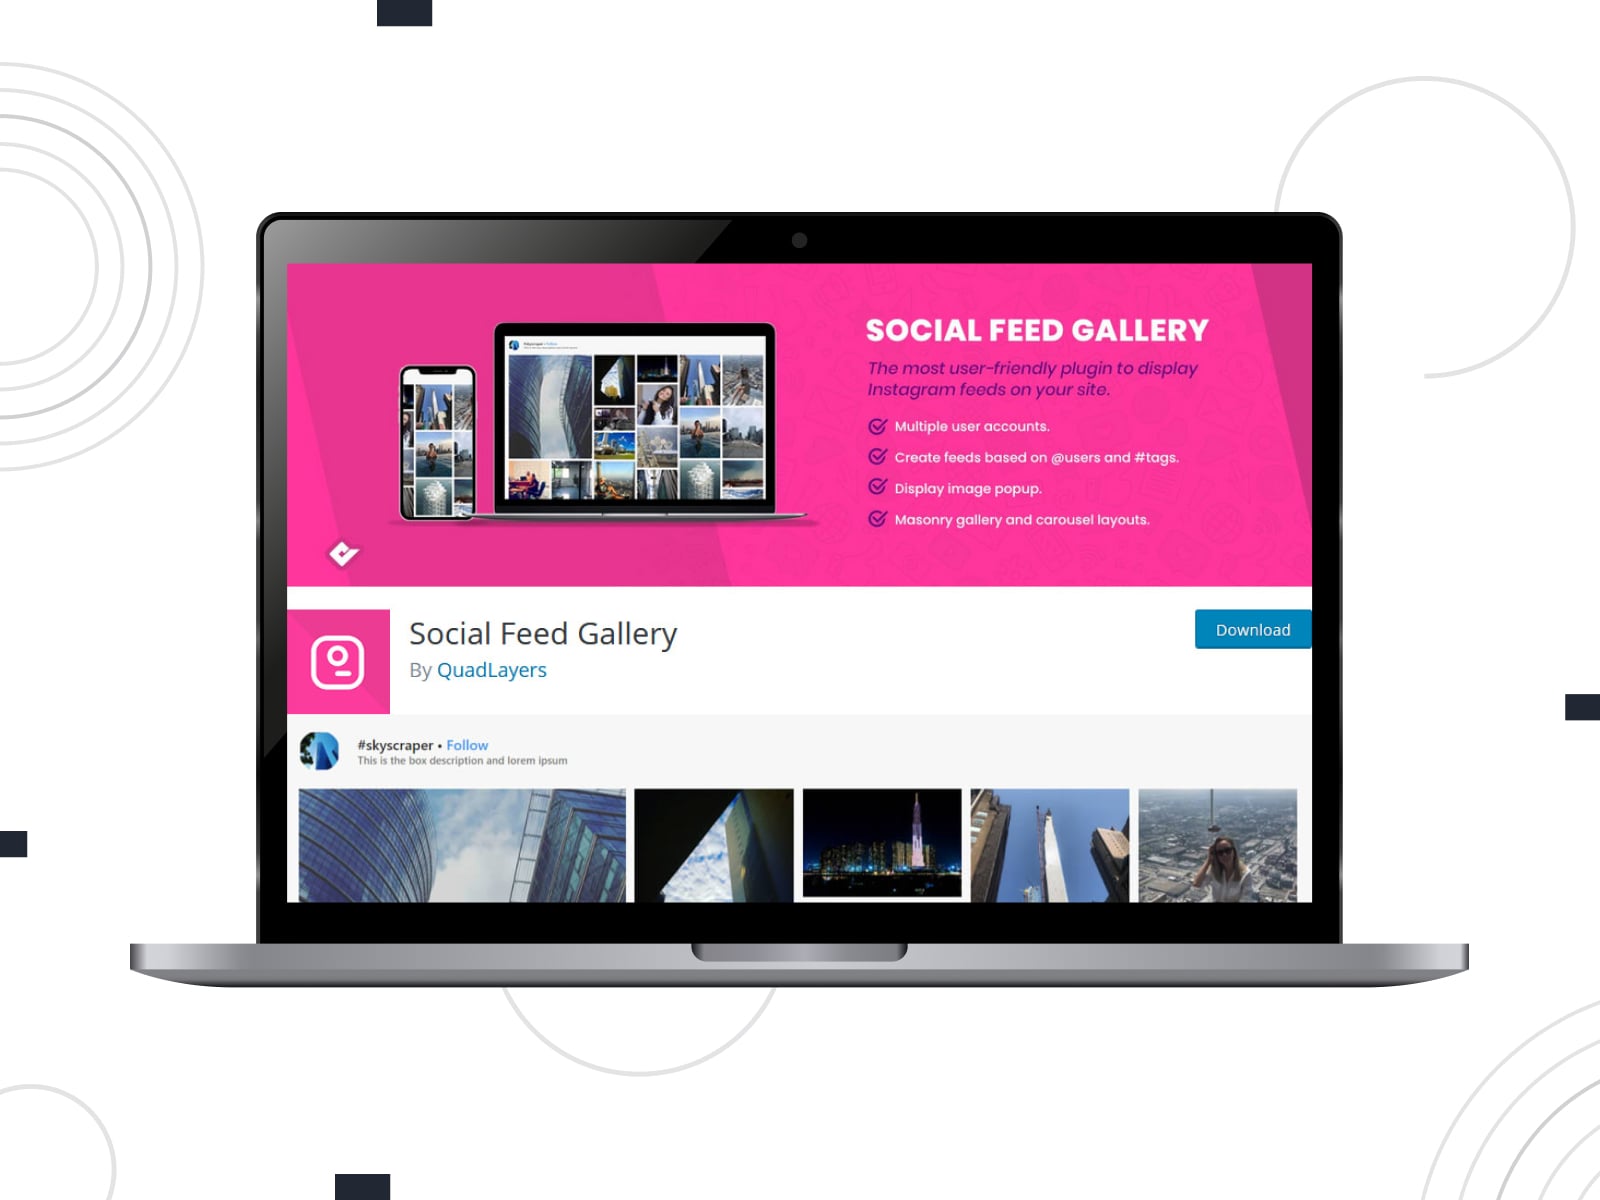 Collage of the Social Feed Gallery Instagram WordPress plugins homepage in pink, white and blue colors.